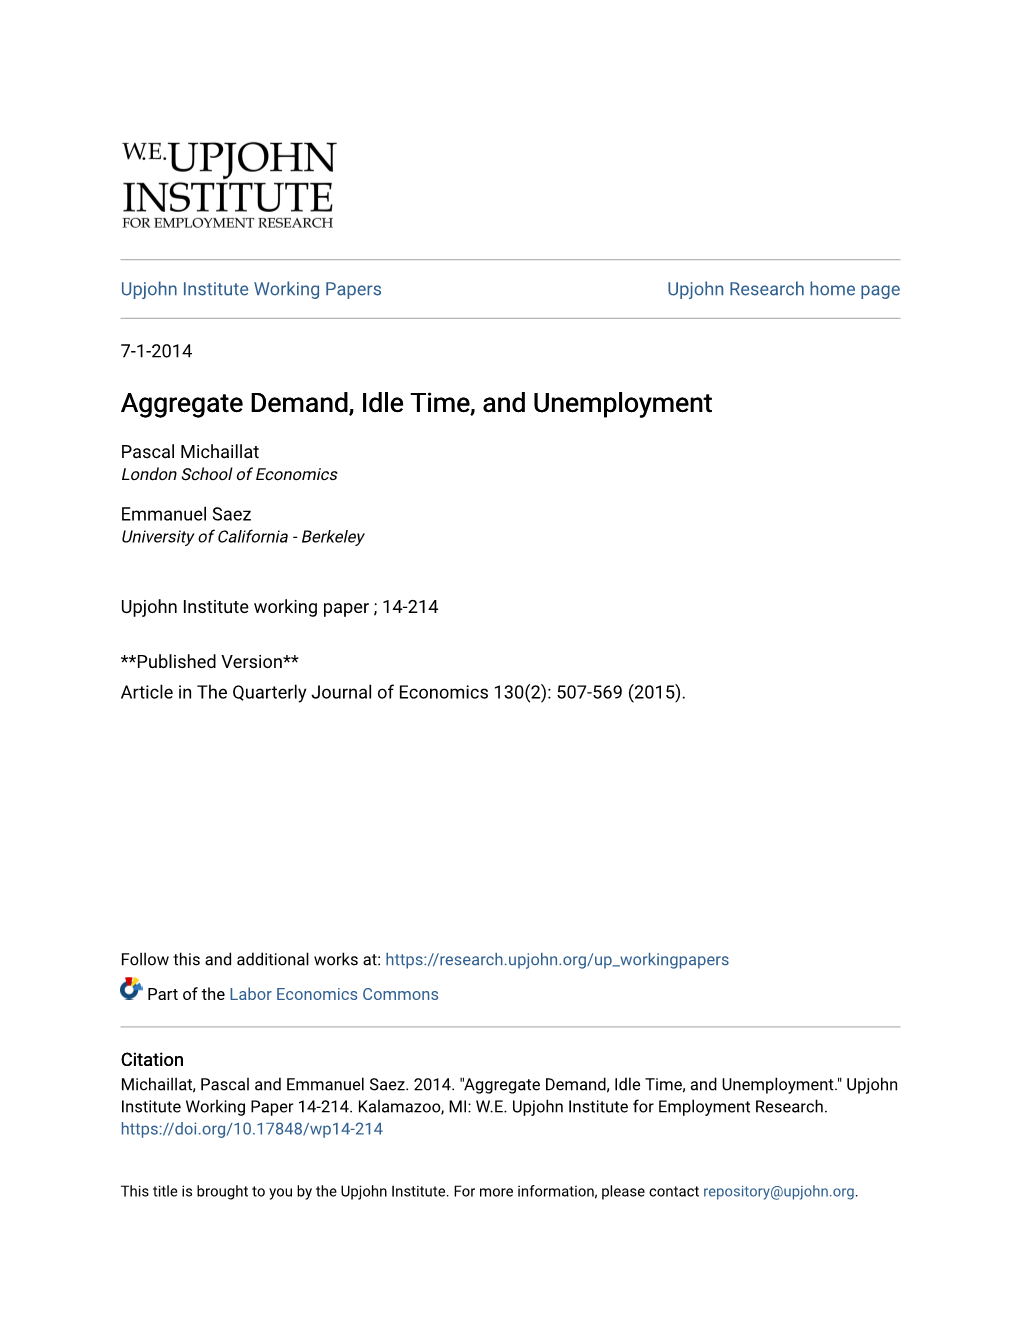 Aggregate Demand, Idle Time, and Unemployment